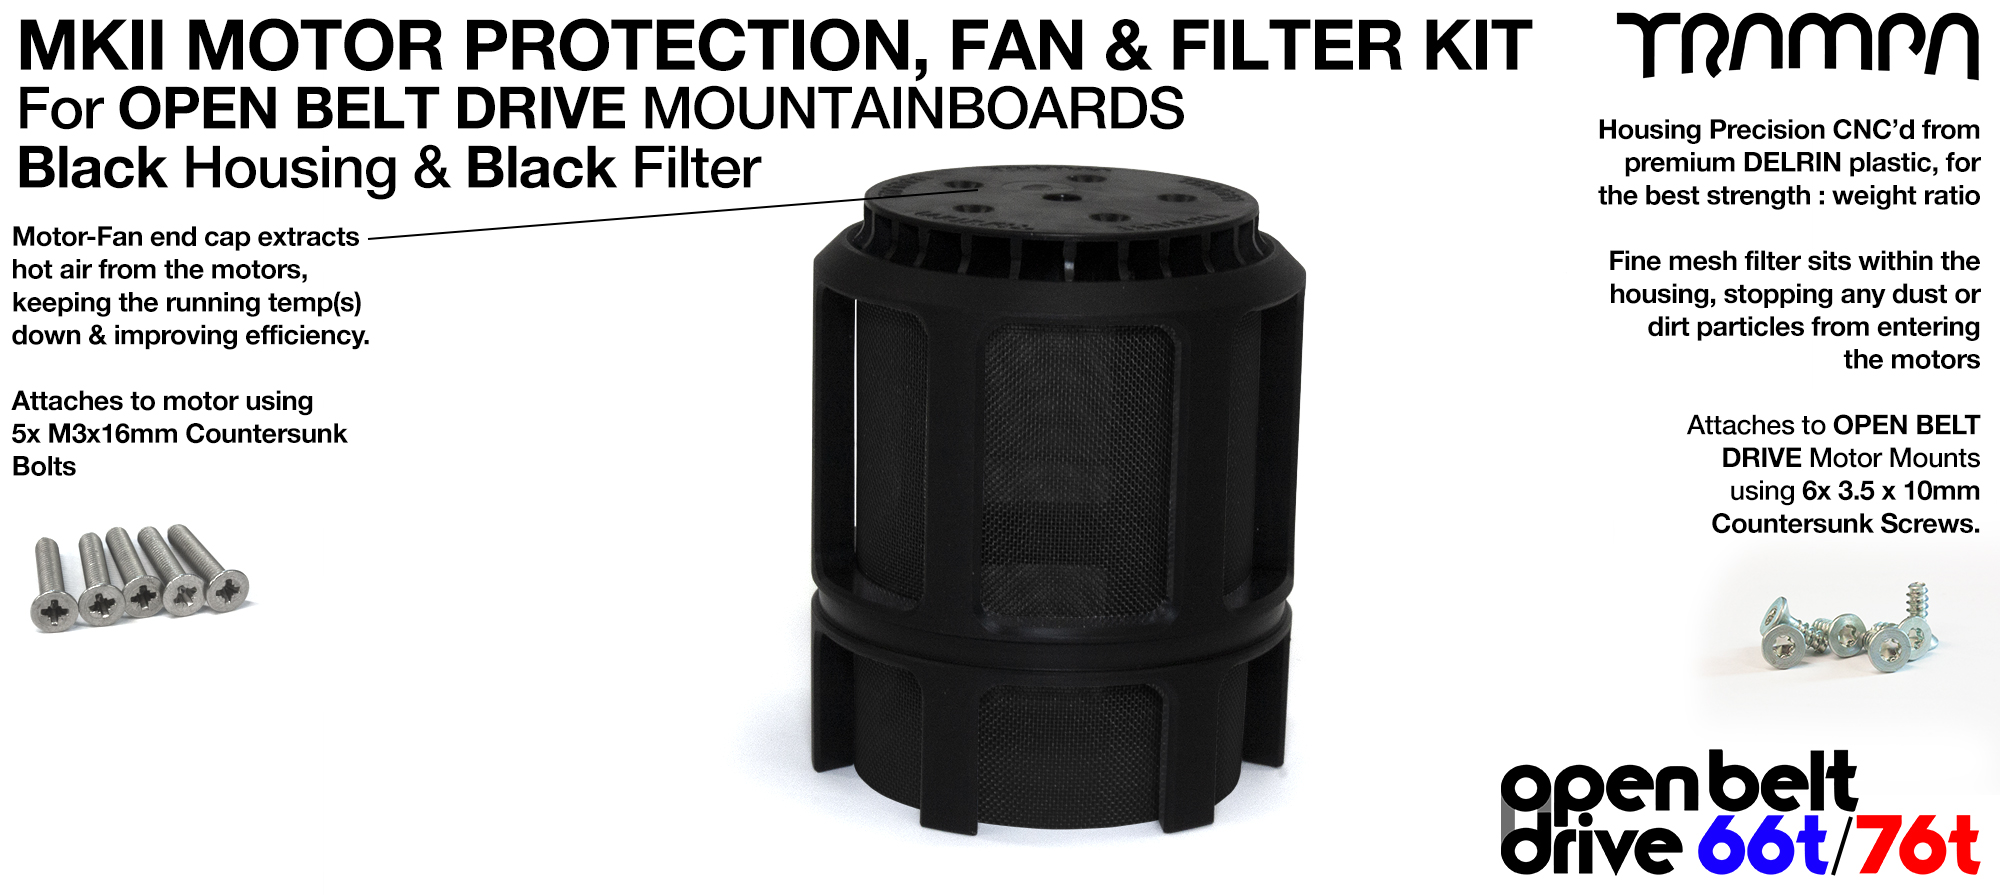 1x OBD MKII Motor protection Sleeve with BLACK Filter